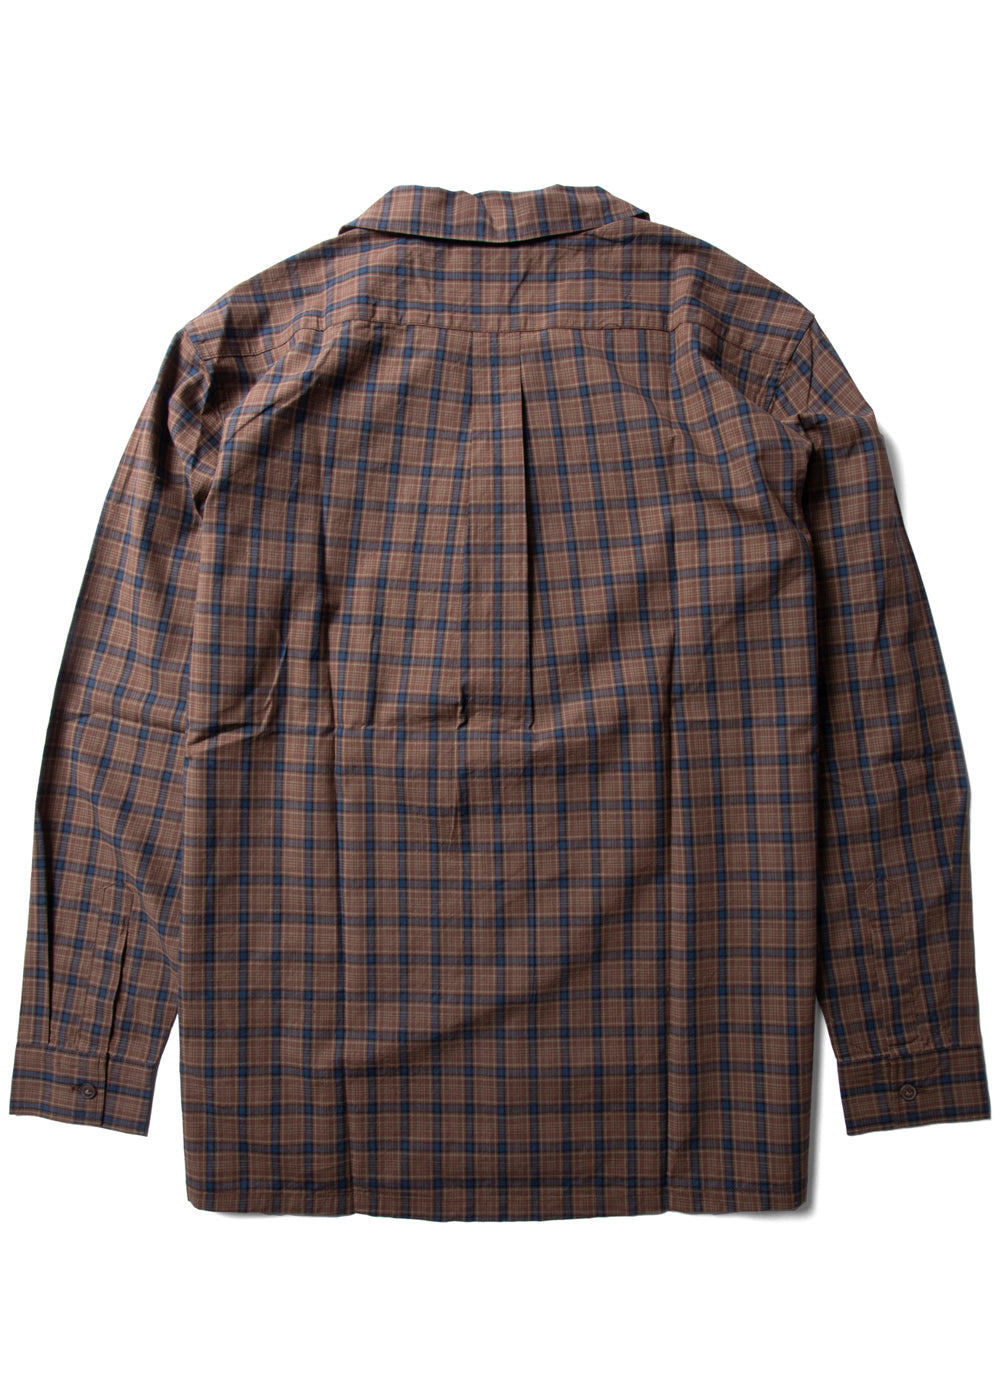 Undefined Lines Eco Shirt - CHOCOLATE